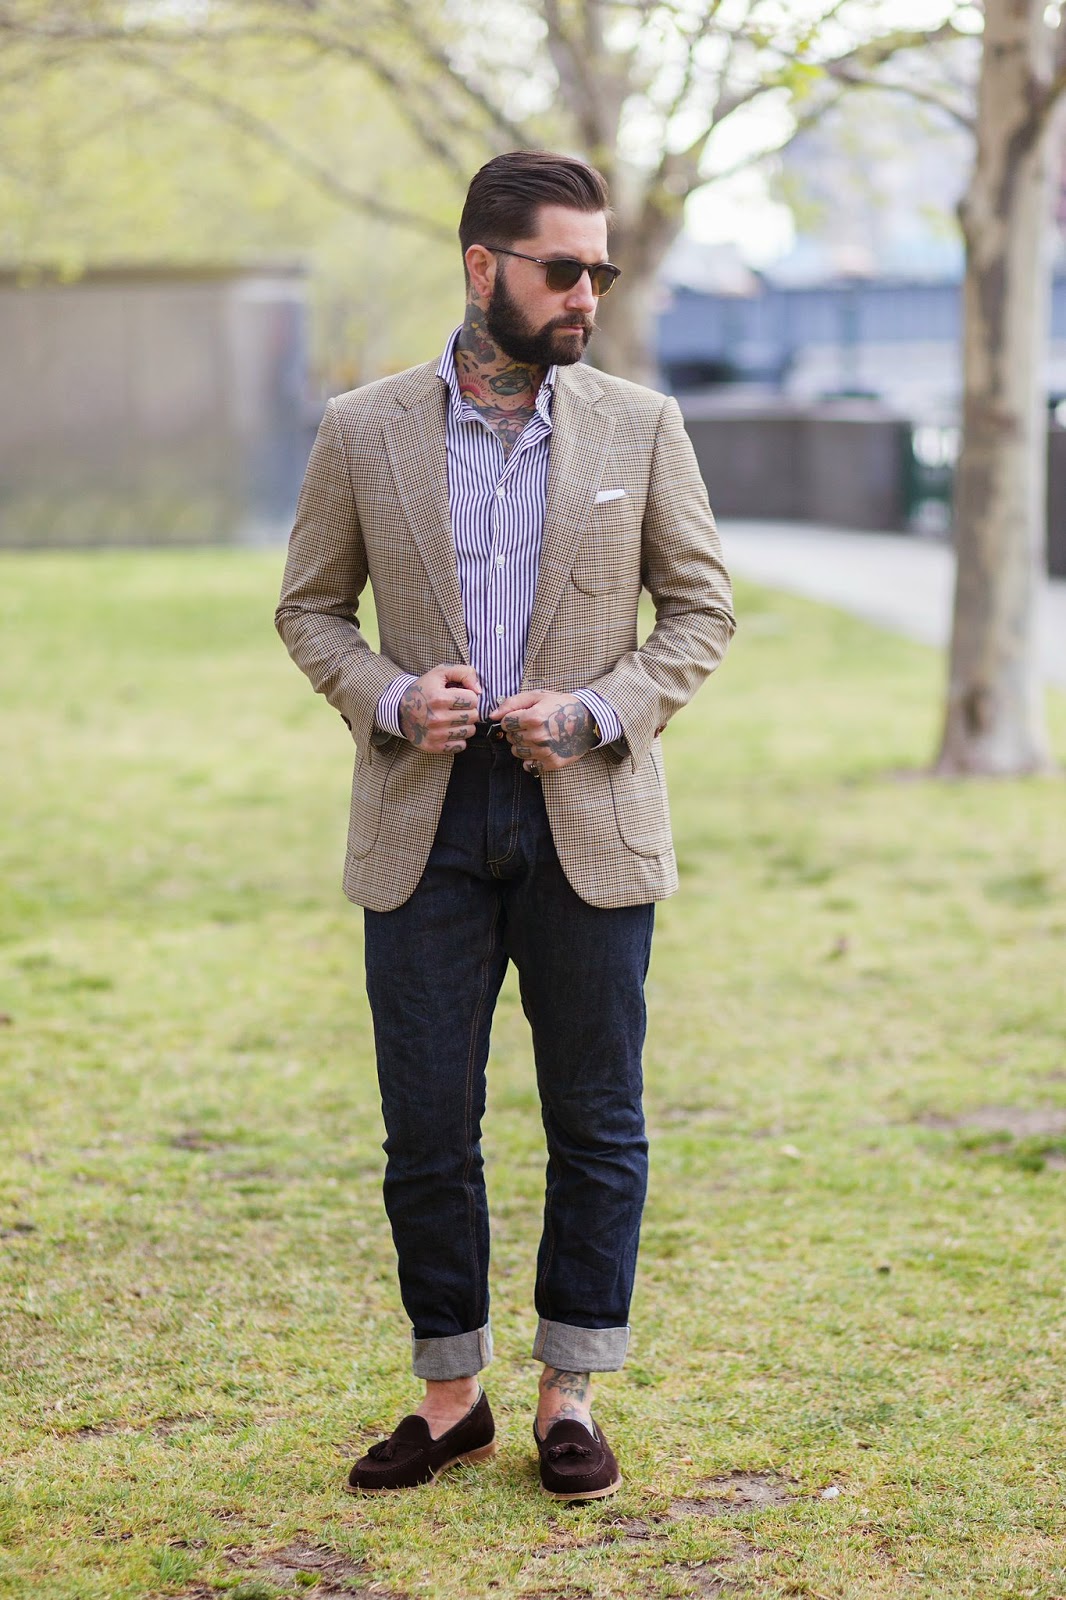 Does being a smart dresser make casual lesser?